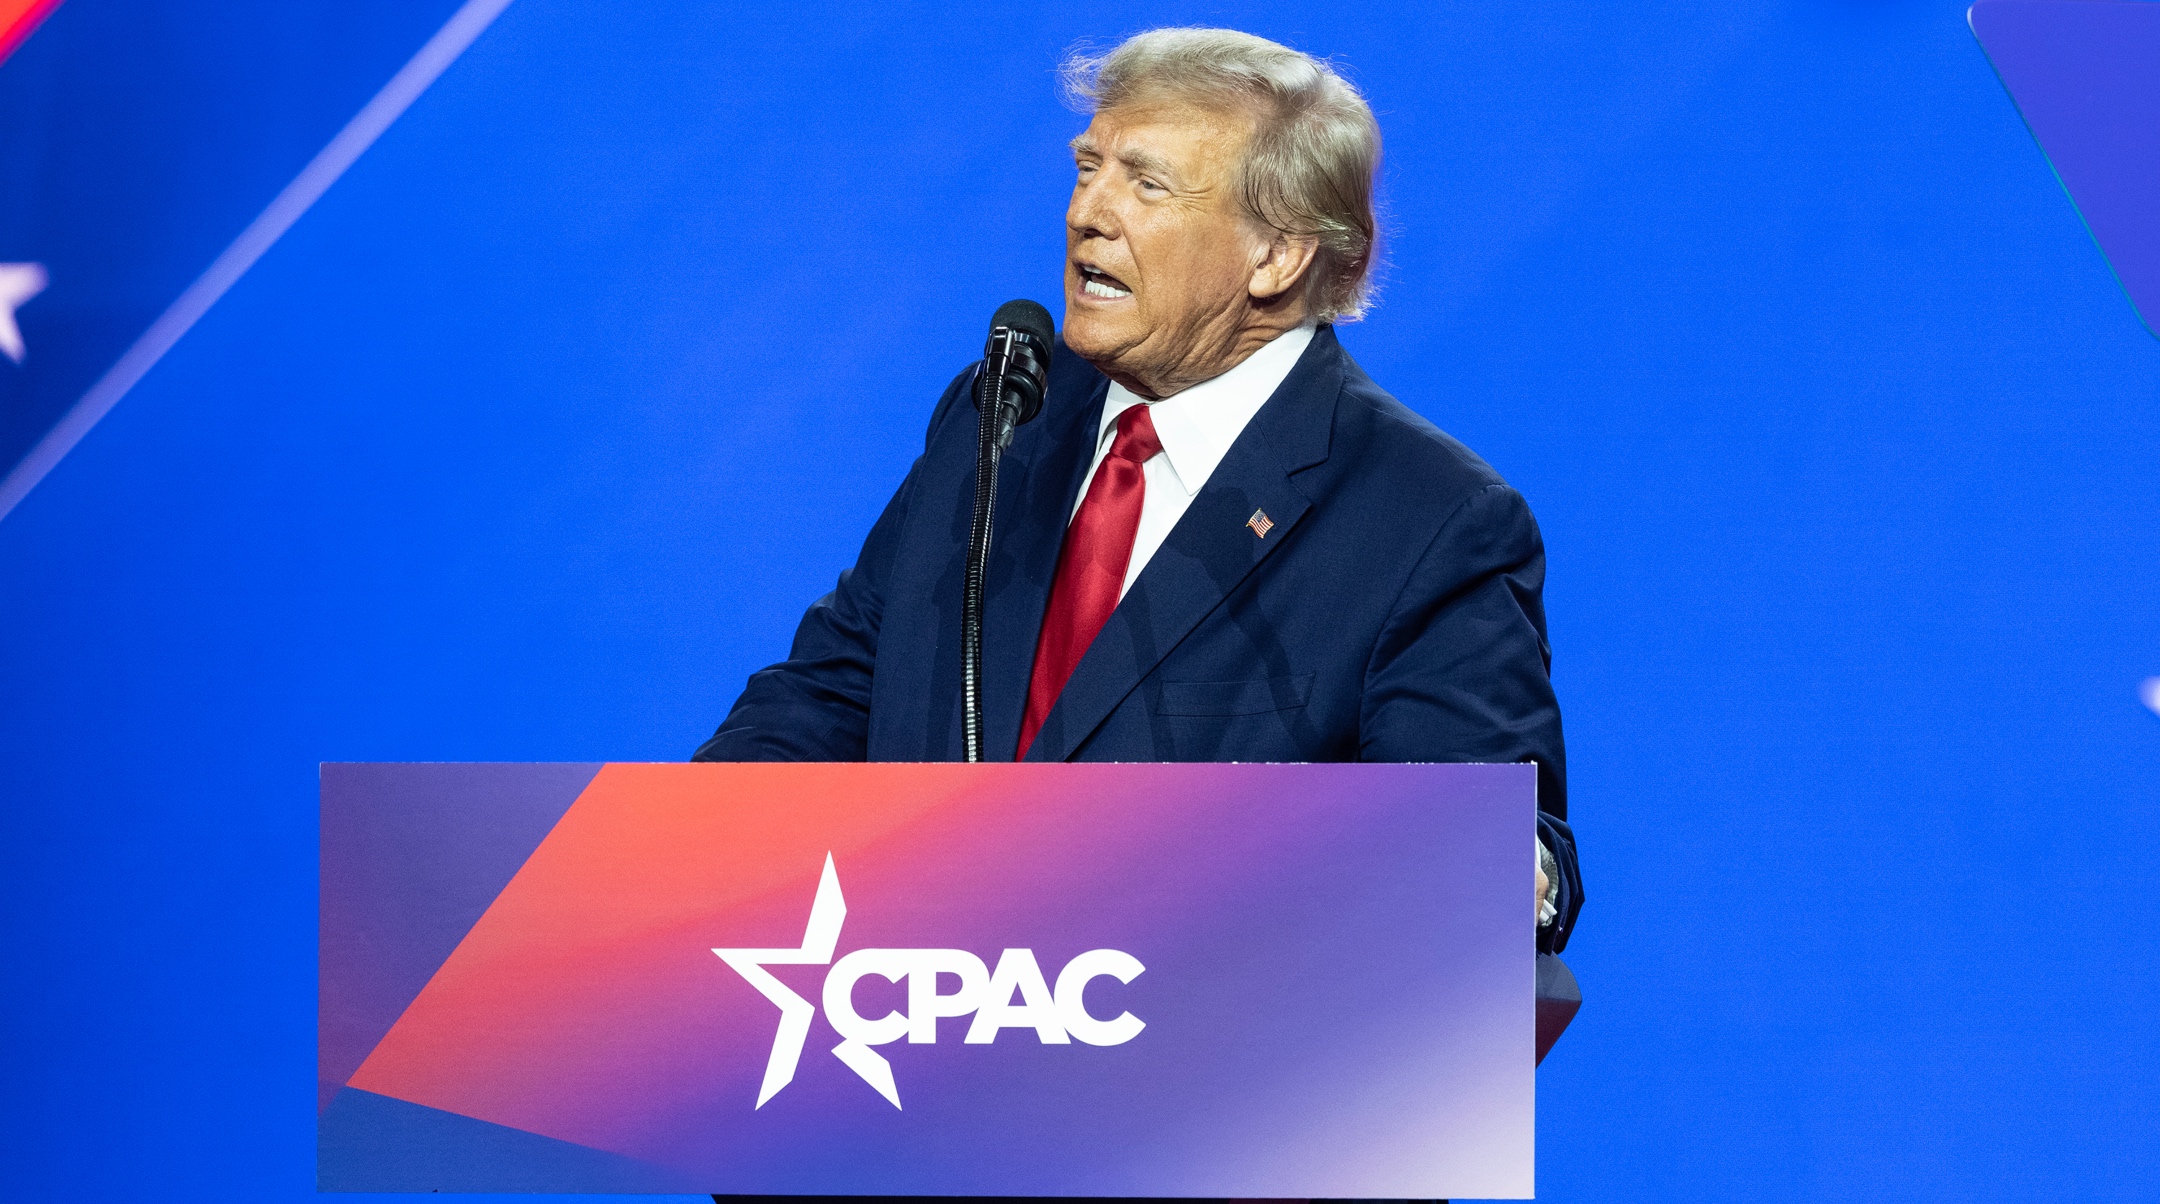 Donald J. Trump, 45th President of the United States speaks at the CPAC Washington, DC conference at Gaylord National Harbor Resort & Convention Center in National Harbor, Maryland, March 4, 2023. (Lev Radin/Pacific Press/LightRocket via Getty Images)